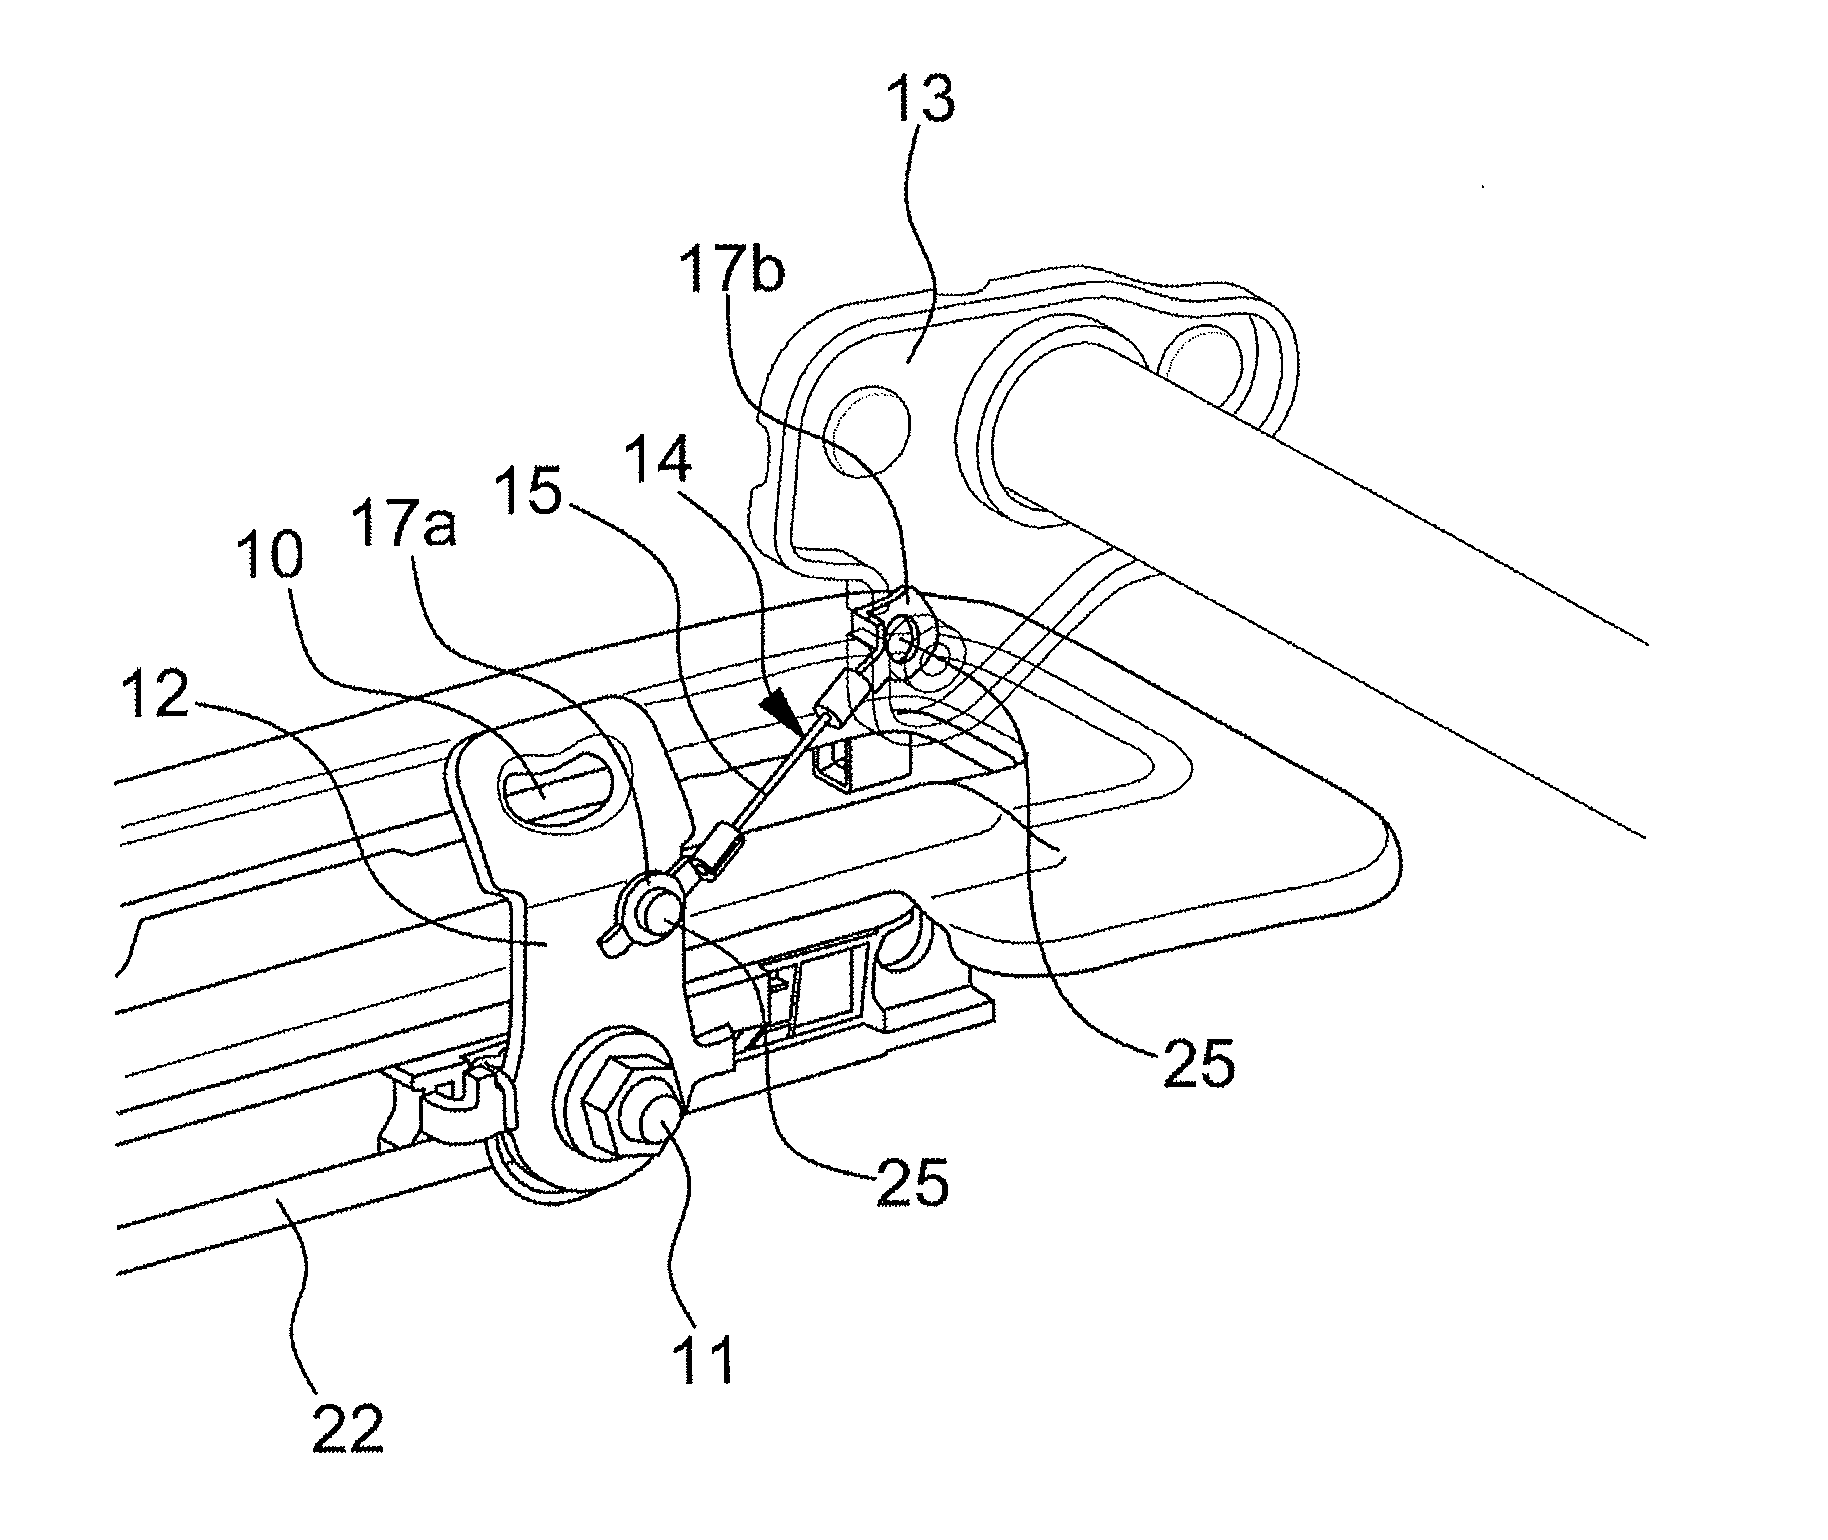 Buckle device for seat belt of vehicle